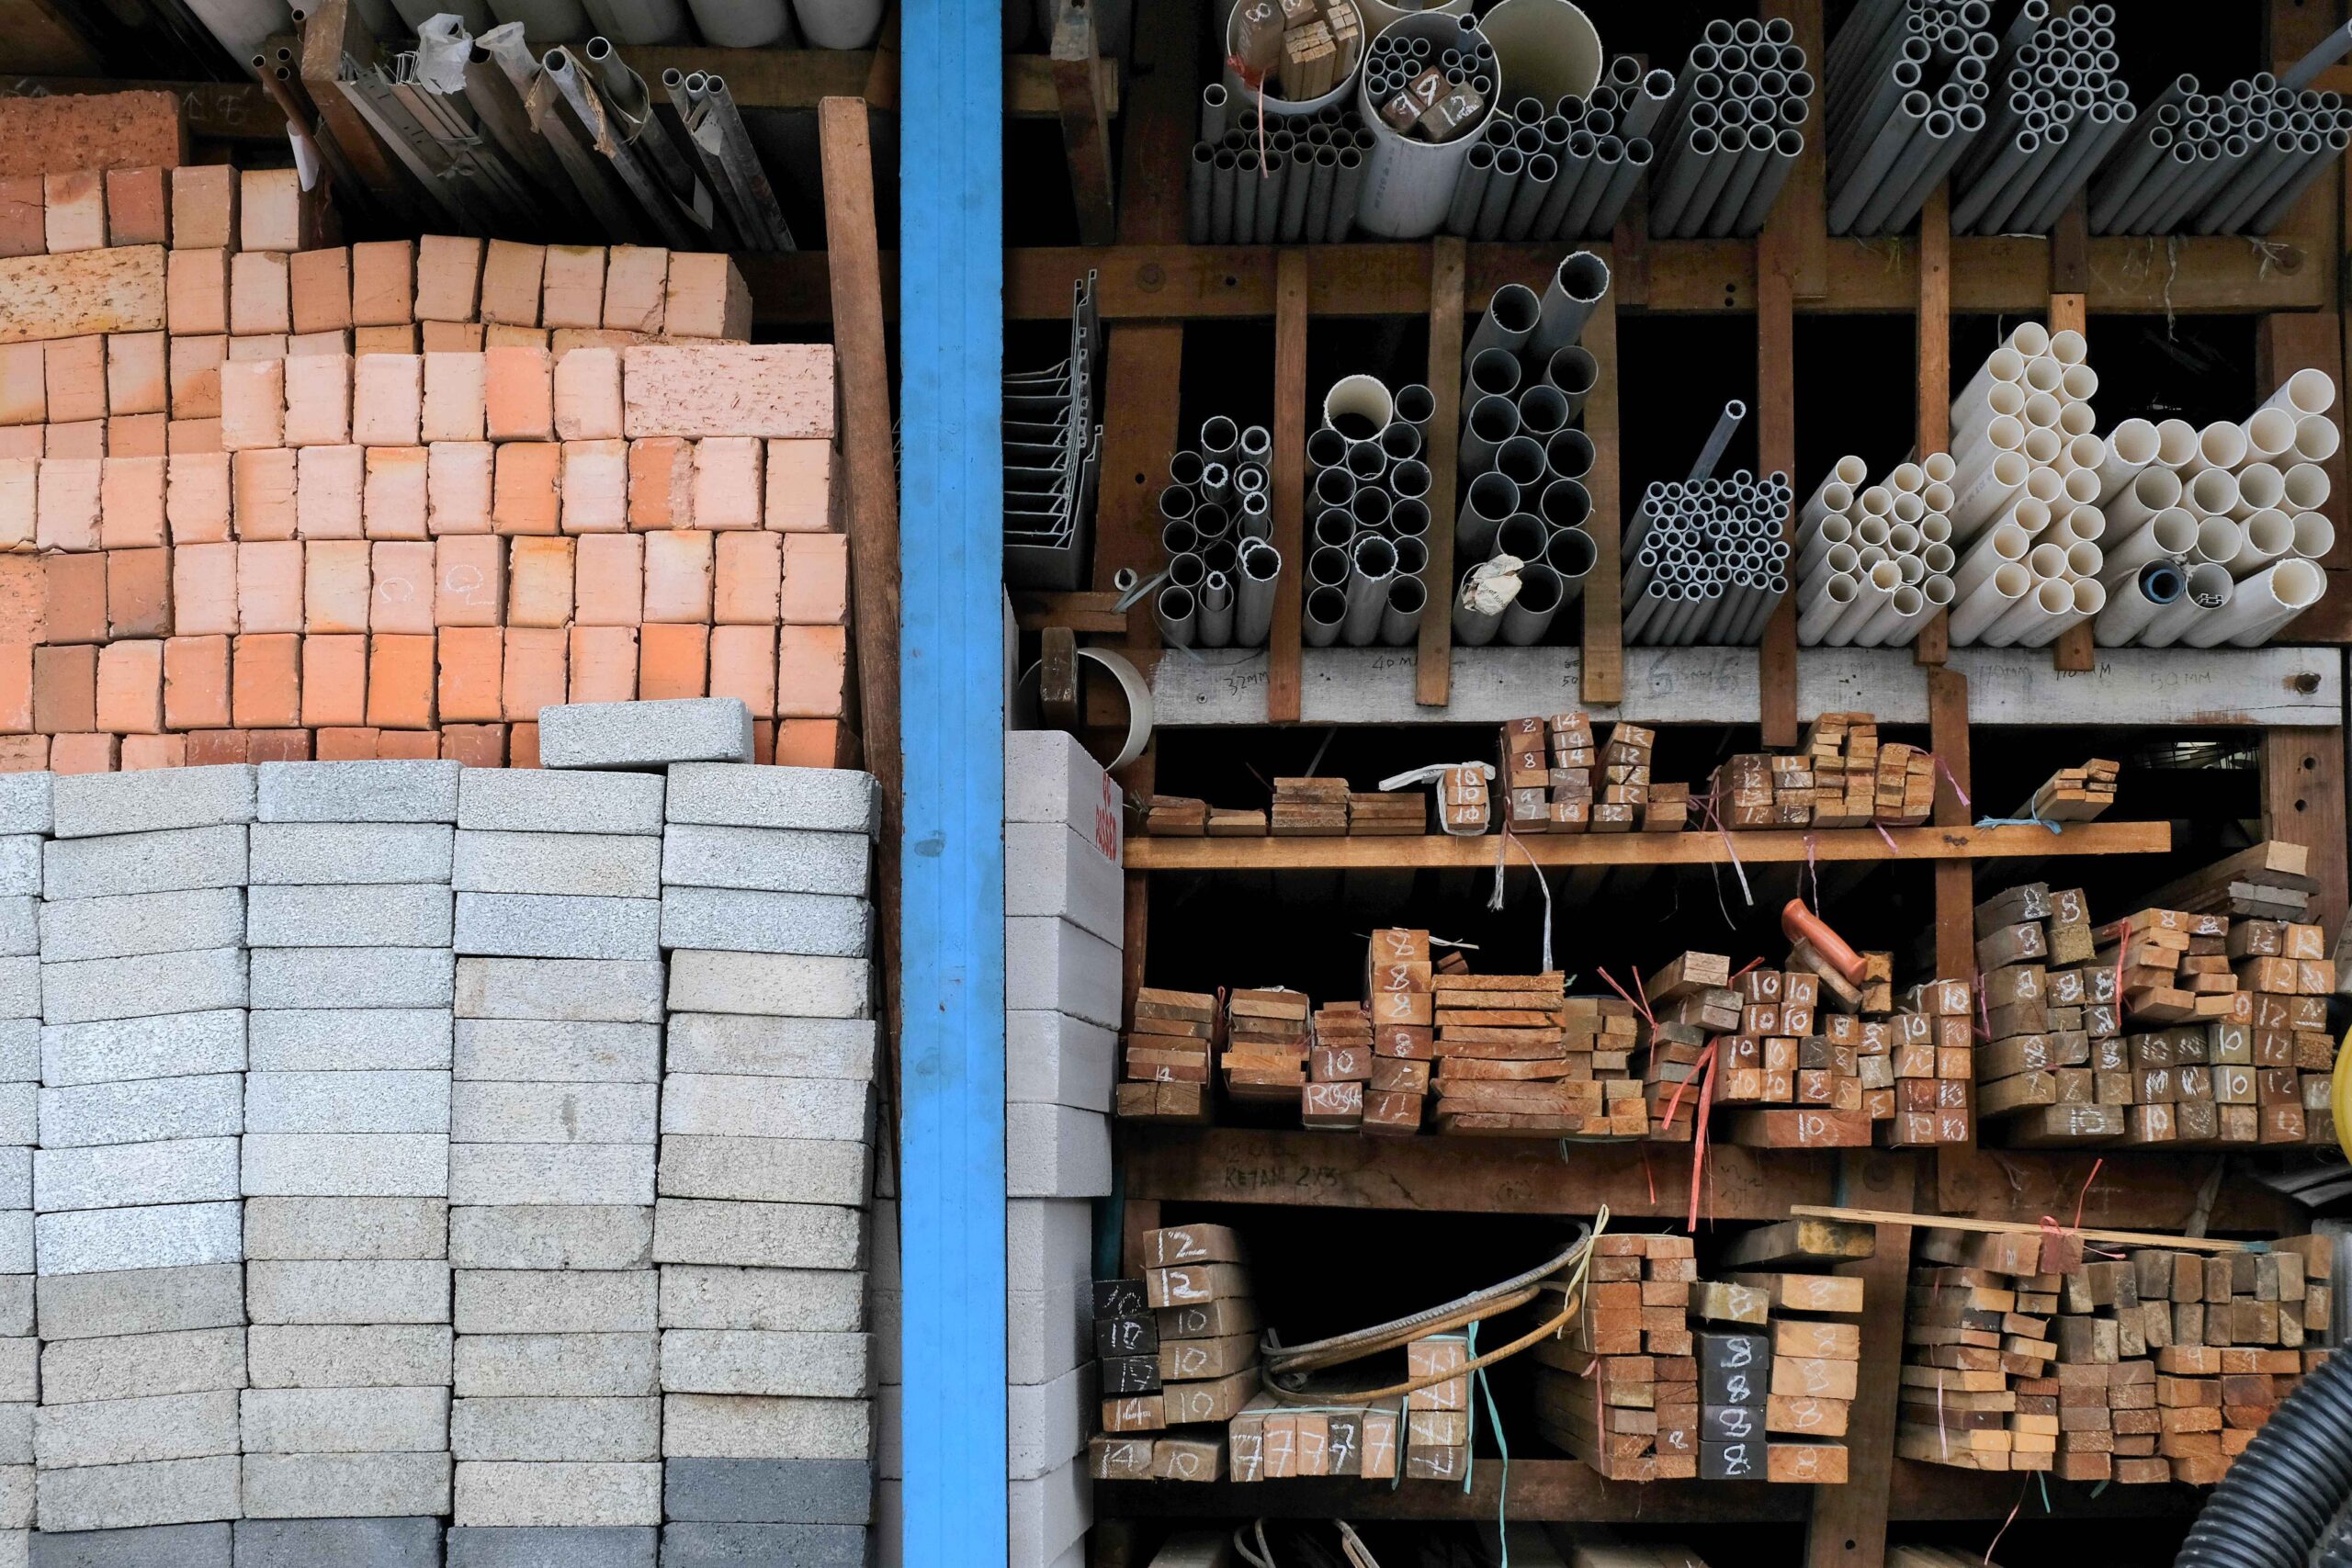 Building Supplies and Materials